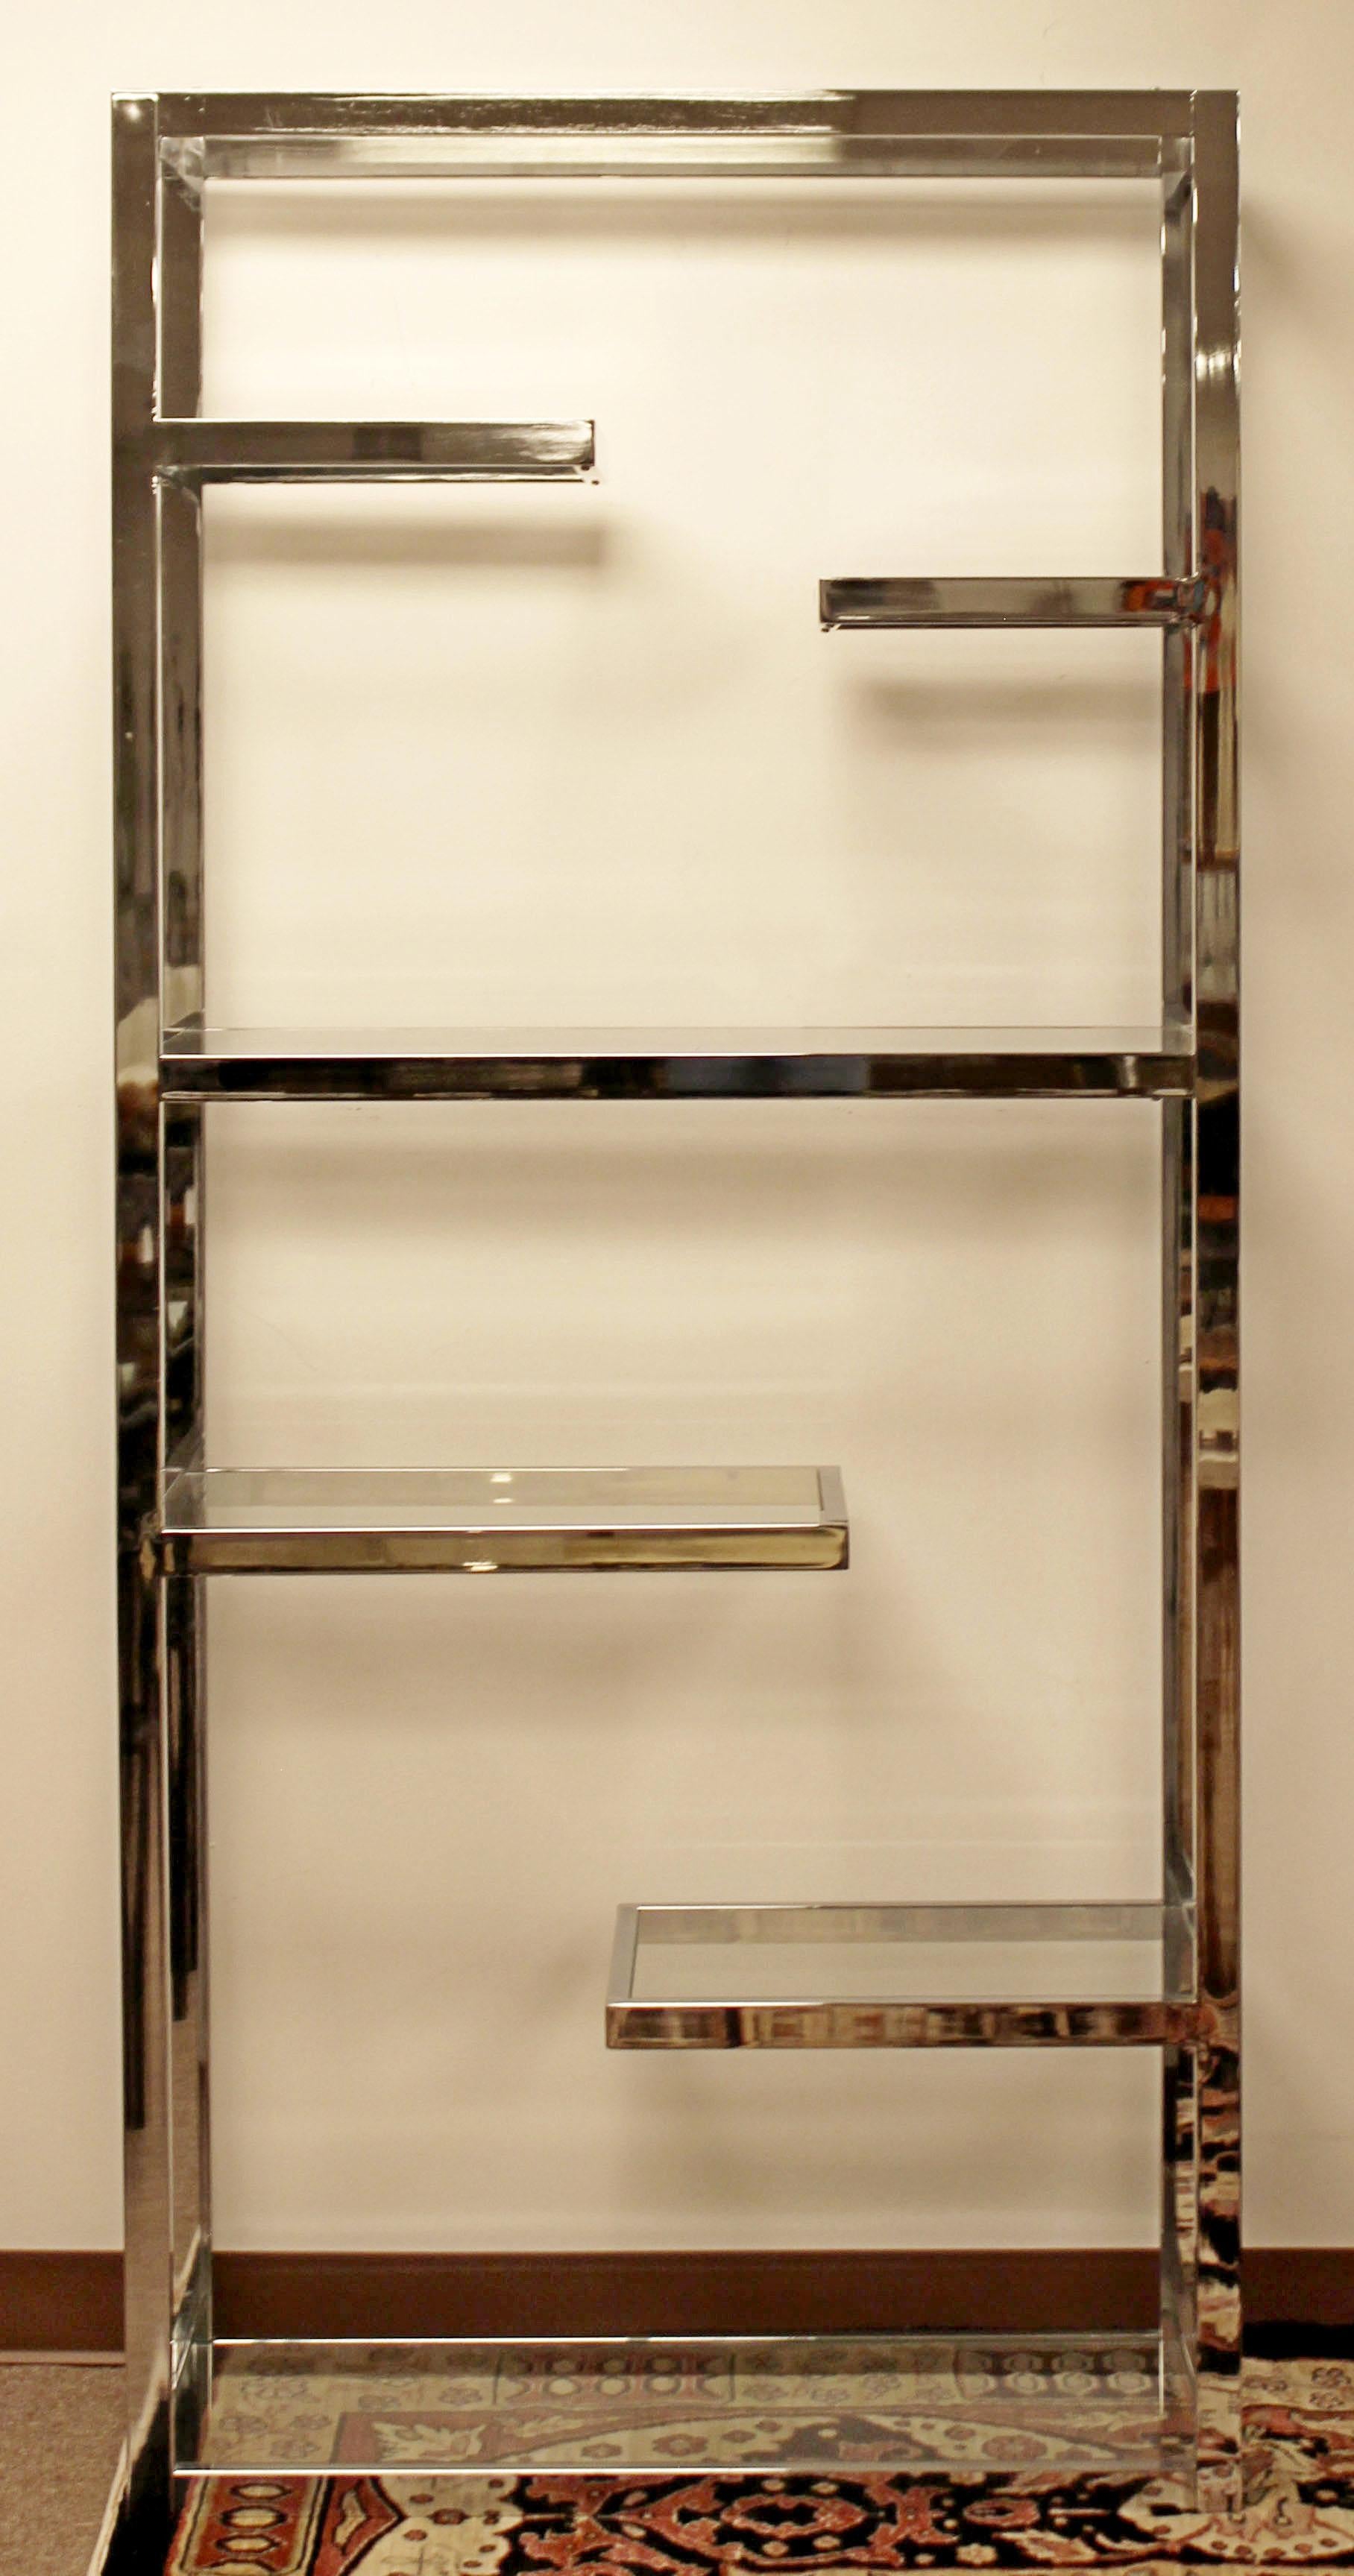 For your consideration is a magnificent, chrome étagère shelving unit, with six uneven shelves, by Milo Baughman, circa the 1970s. In excellent condition. The dimensions are 36